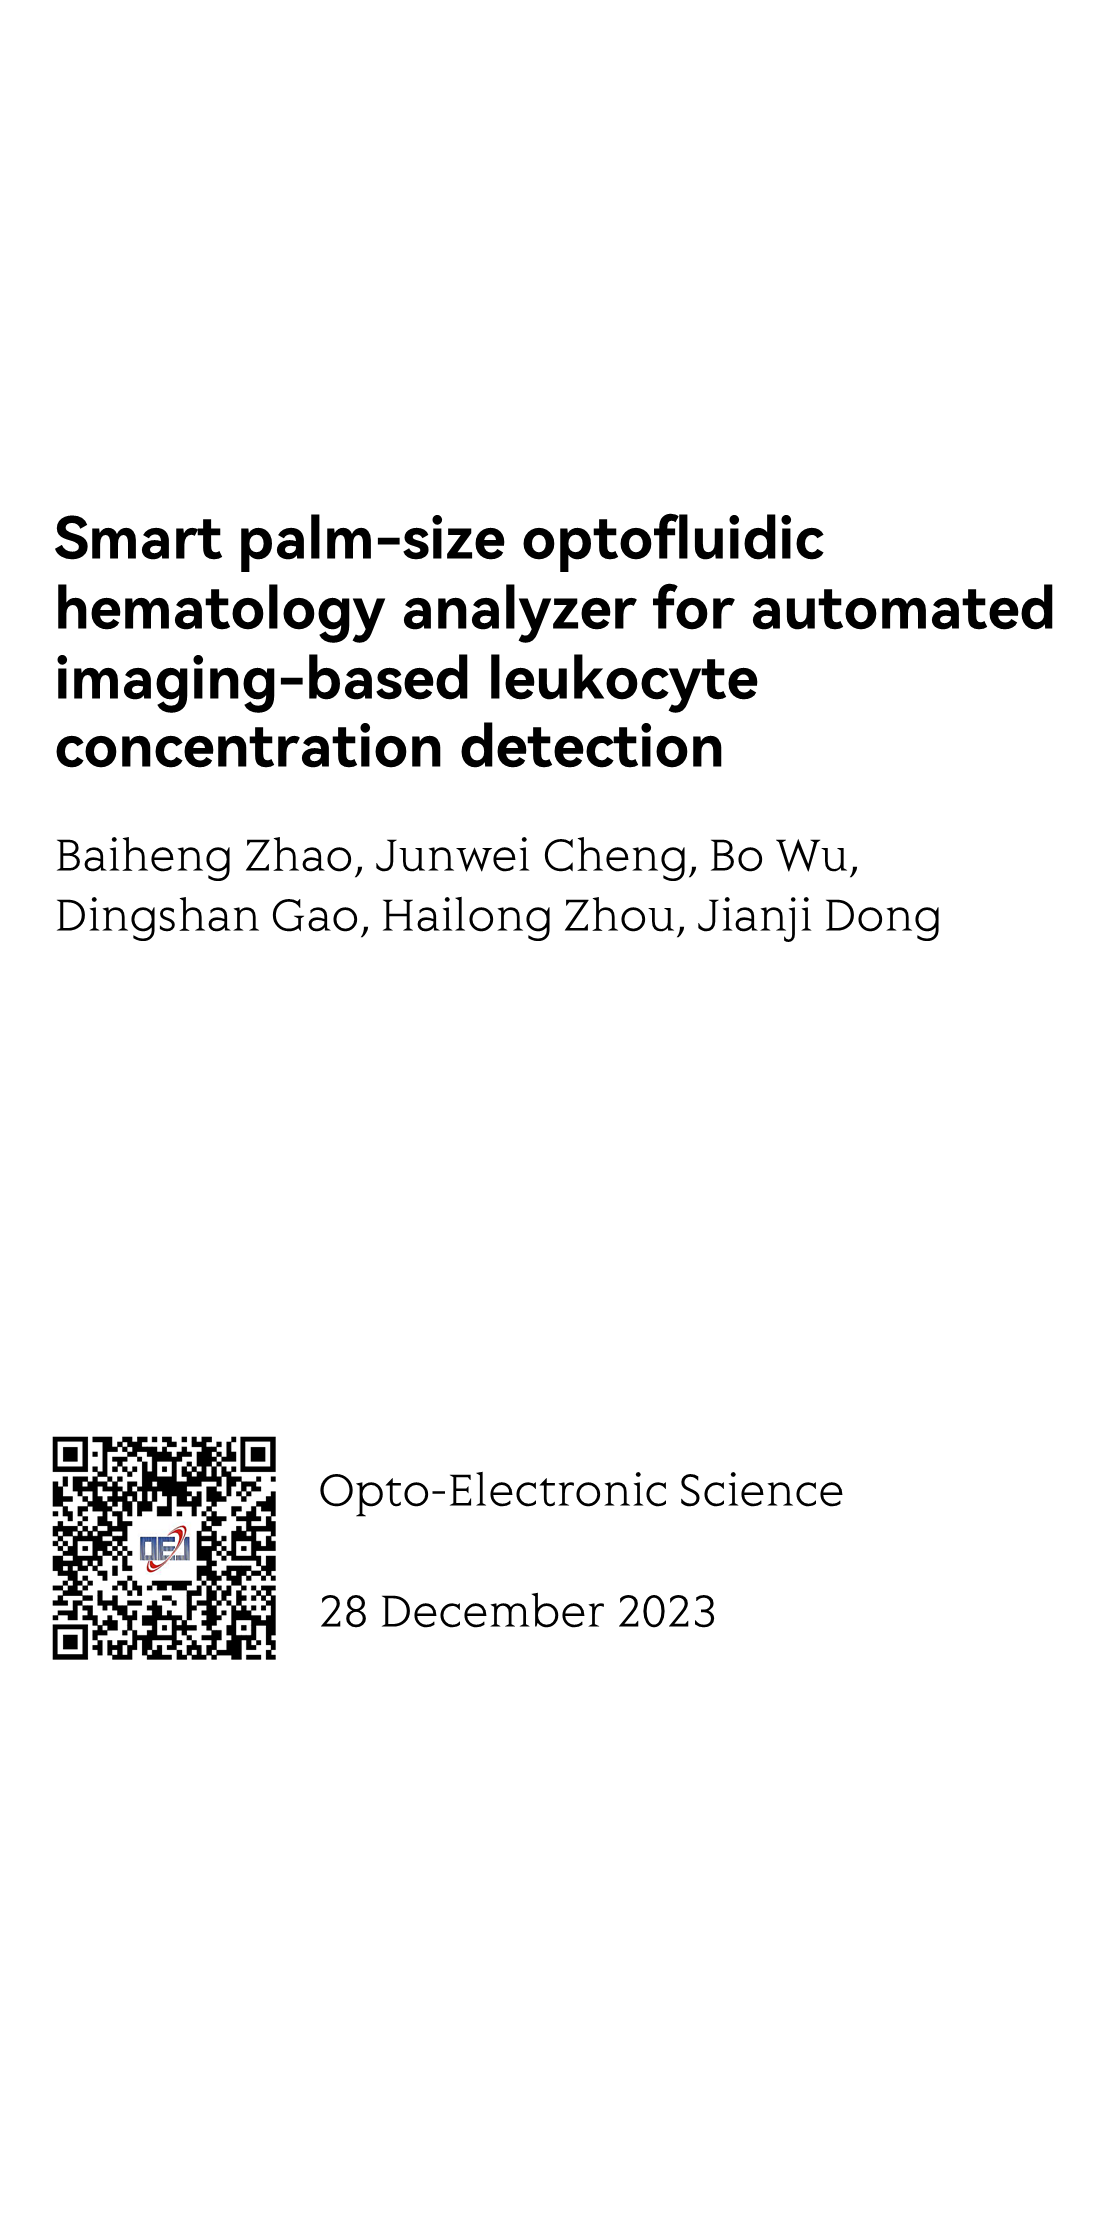 Smart palm-size optofluidic hematology analyzer for automated imaging-based leukocyte concentration detection_1